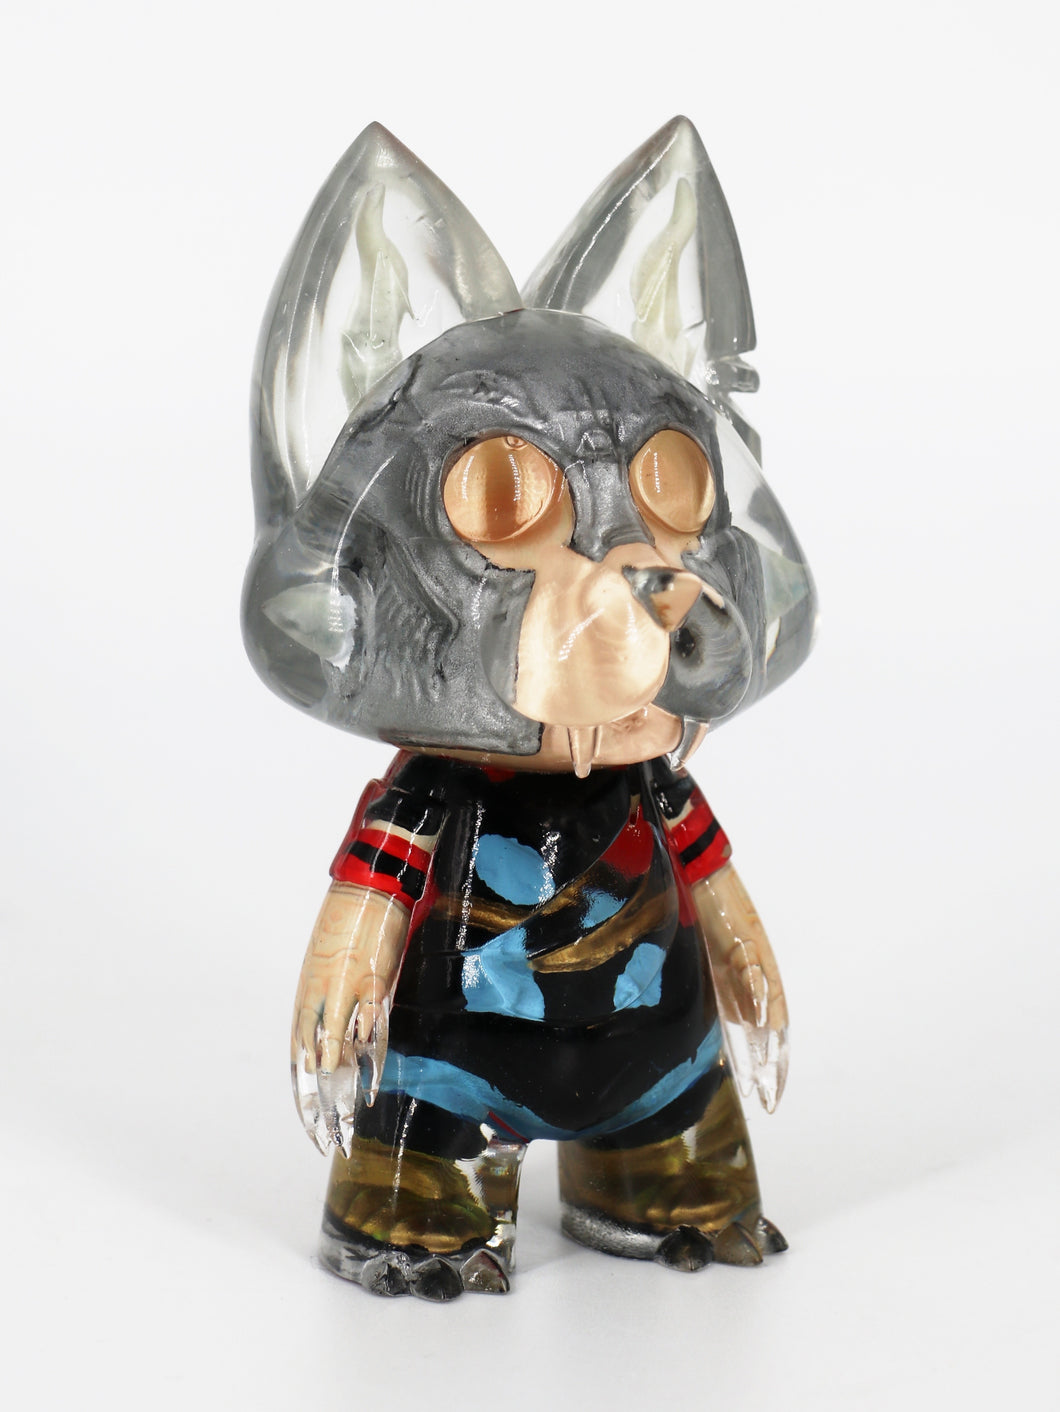 7HUND3R G0D Royal Gate Soldier - Akame Toys x SauceDrops Art - Heroes and Villains